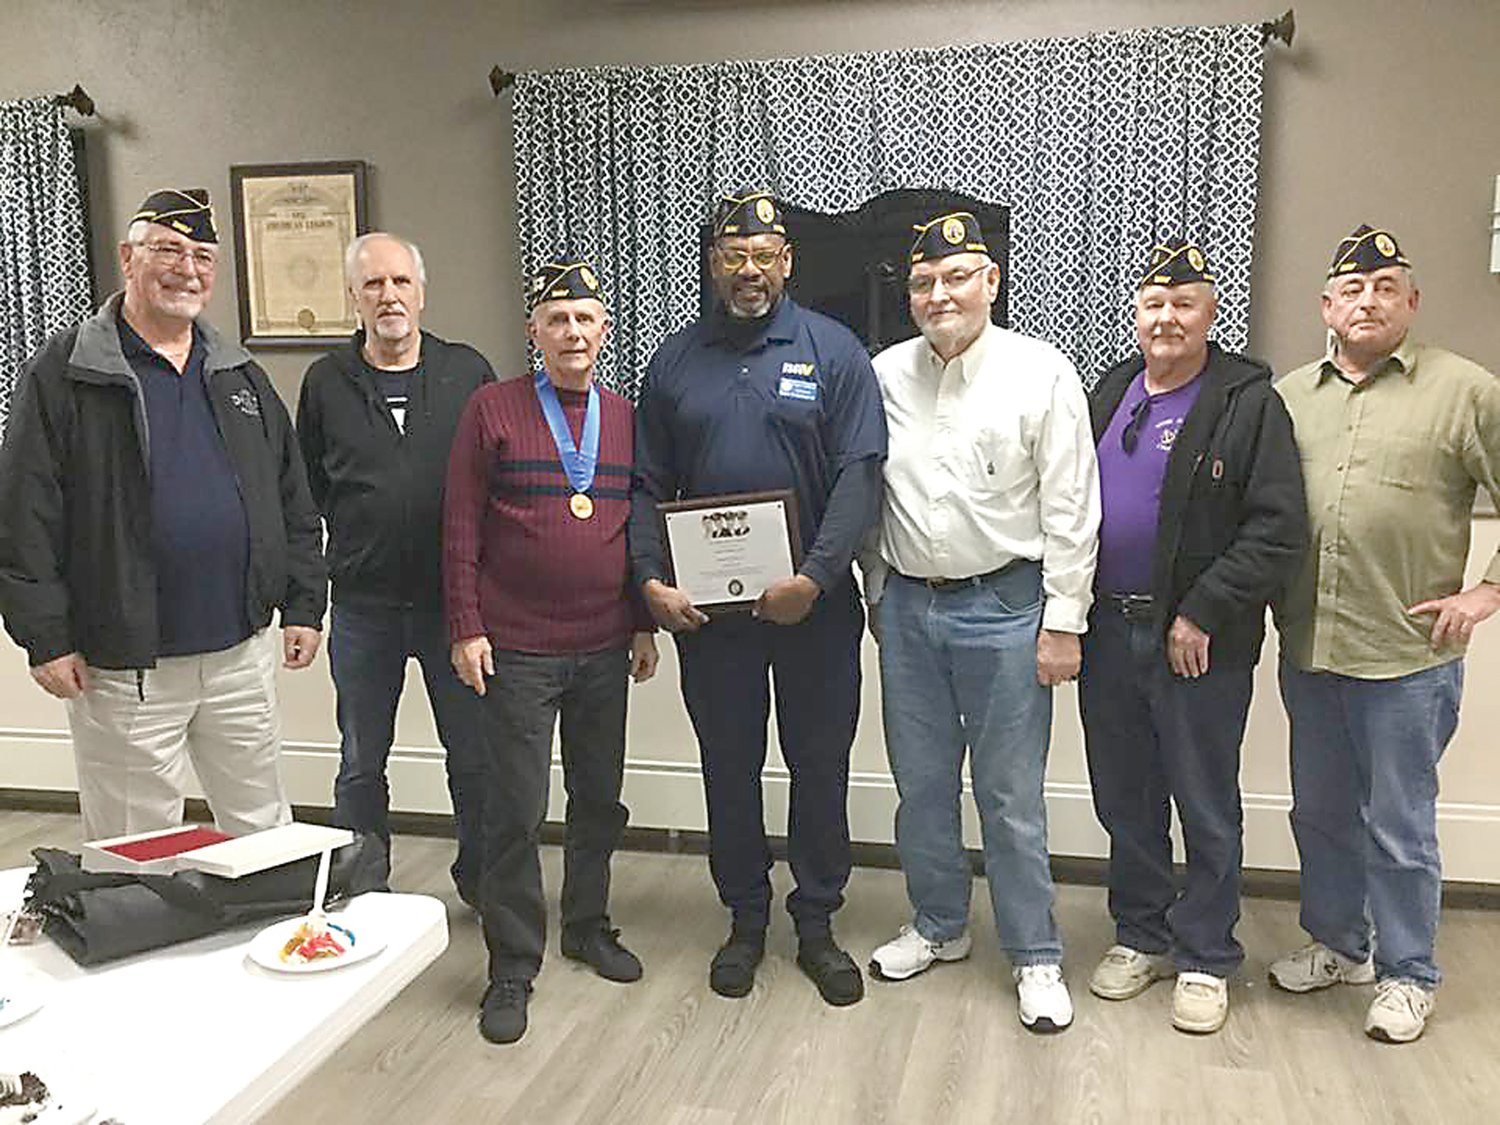 At a meeting of the Disabled Americans Bucks County Chapter are, from left, Don Parzanese, sergeant-at-arms; Bob Staranowicz, adjutant; Jack Thomas, junior vice chair; George H Lindsey Jr., commander; Tom Herron, trustee, Bill Severns, membership; and Lou Rizzo, treasurer. Kimberly Carter-Guerian, senior vice chair, is not in the picture.